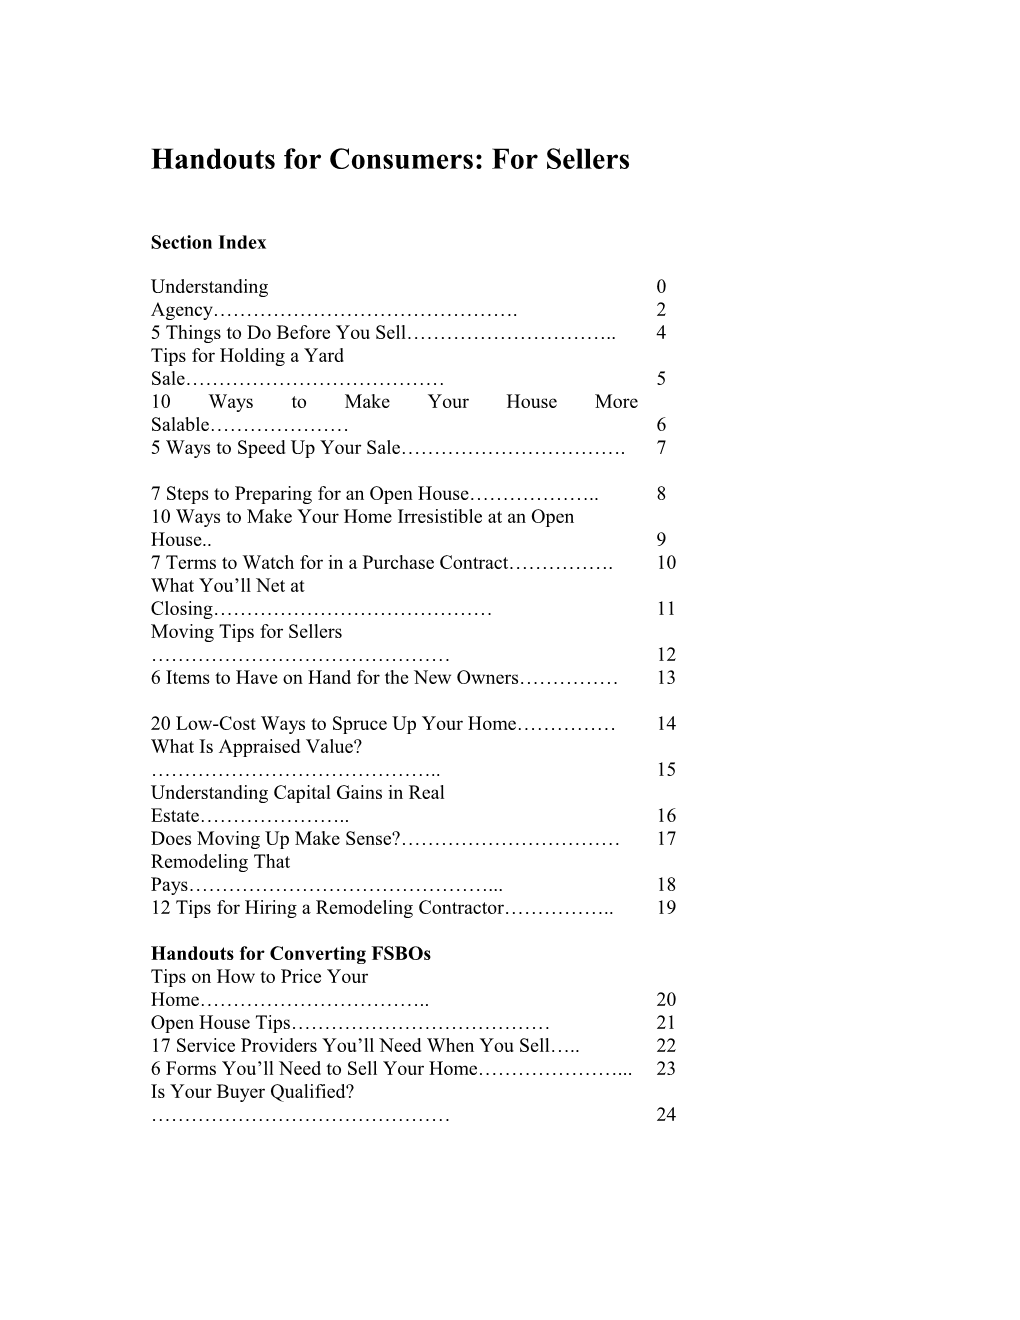 Handouts for Consumers: for Buyers